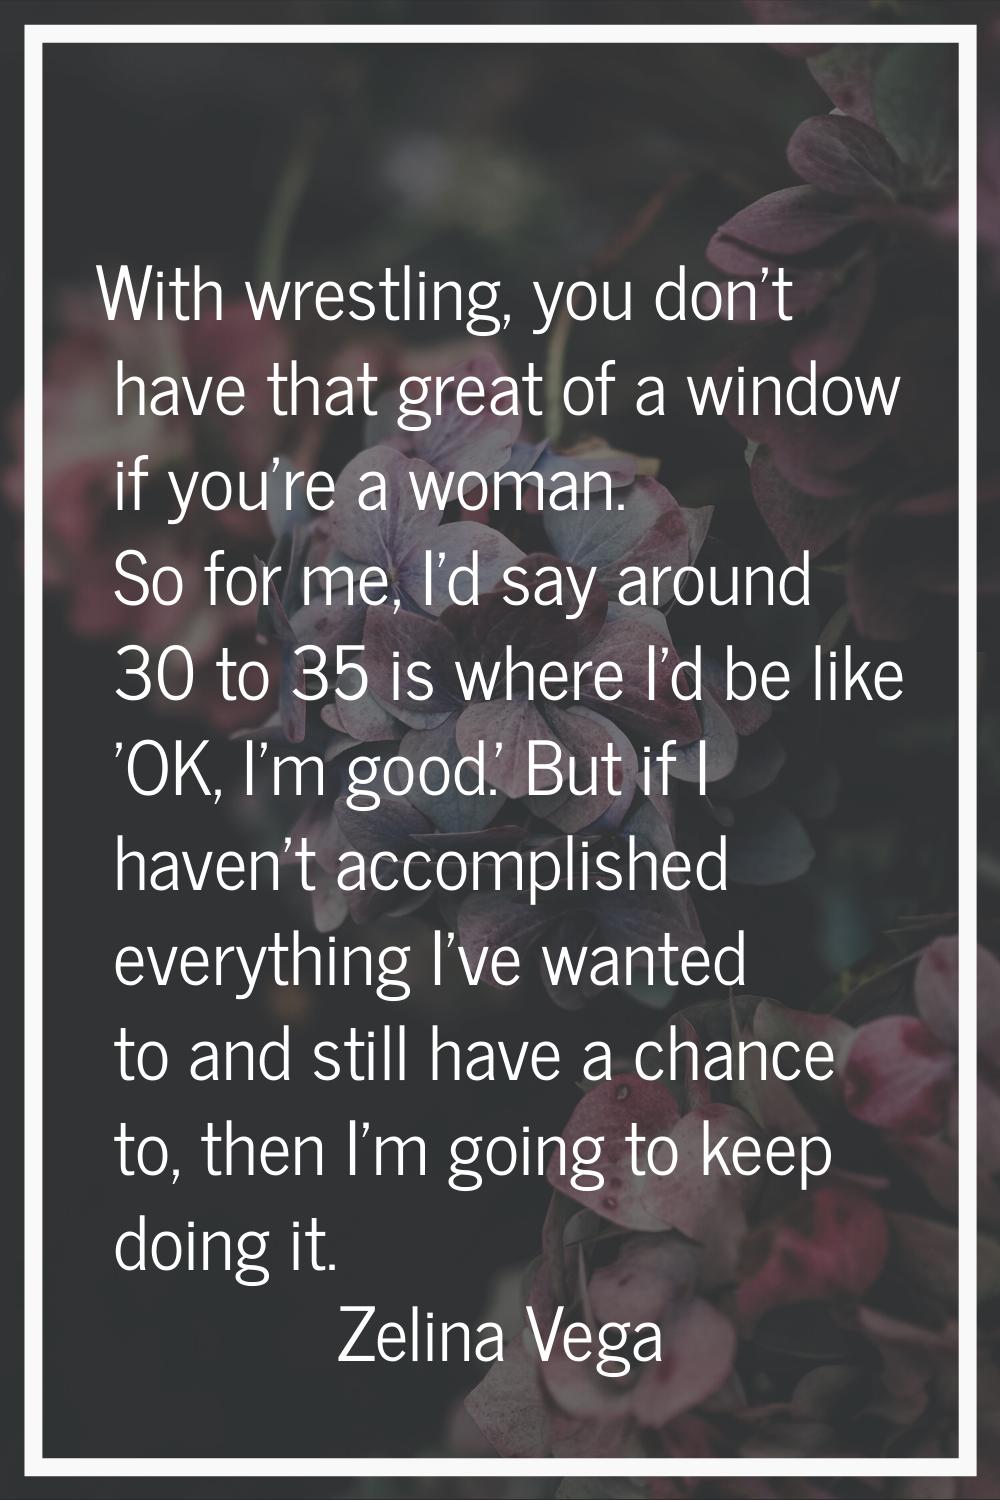 With wrestling, you don't have that great of a window if you're a woman. So for me, I'd say around 